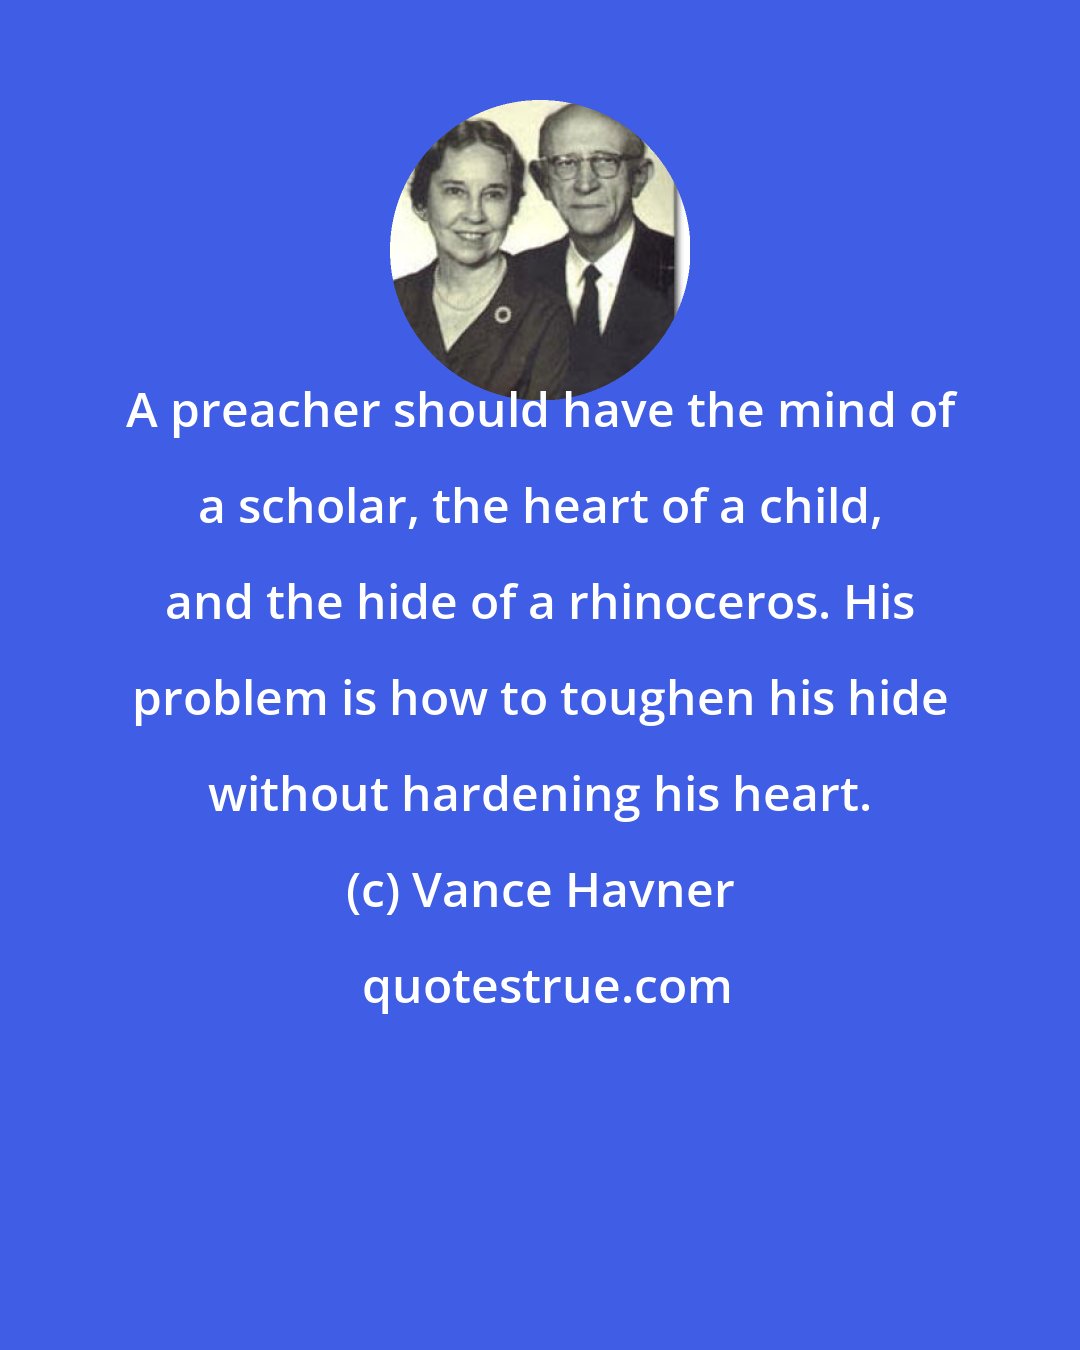 Vance Havner: A preacher should have the mind of a scholar, the heart of a child, and the hide of a rhinoceros. His problem is how to toughen his hide without hardening his heart.